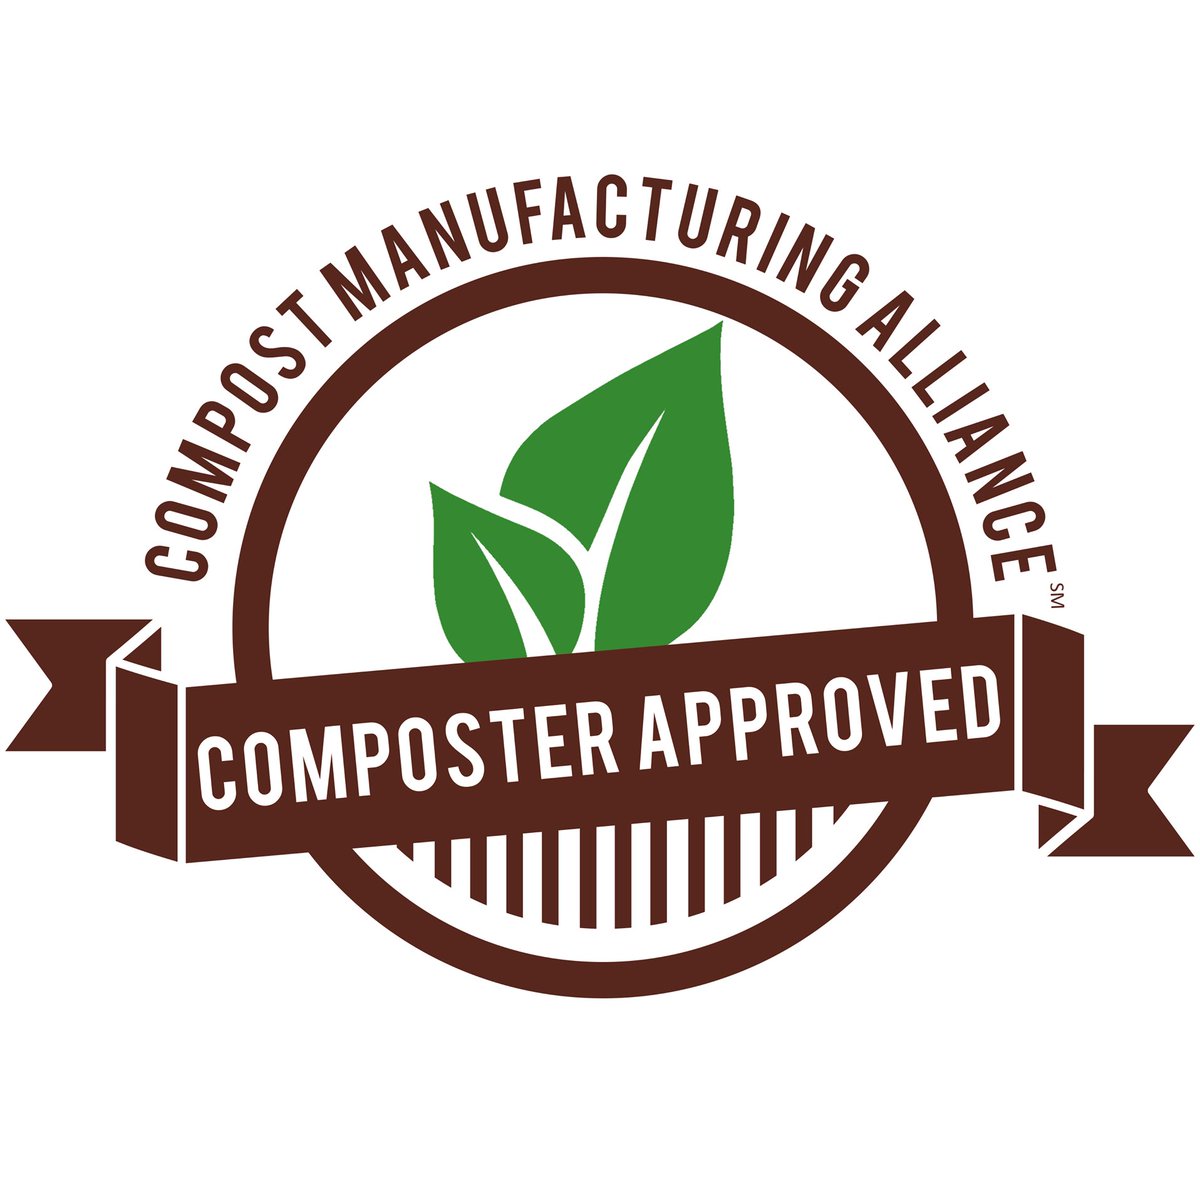 Are #palmleafplates compostable? Yes, palm leaf plates are fully #compostable.  The #dinnerware is a 100% natural product. Make your Business #eco-friendly. We have been accepted by the @CompostableCMA. 
@wafoodtrucks 
@NYFTA1 
@natlfoodtrucks 
@NashFoodTrucks